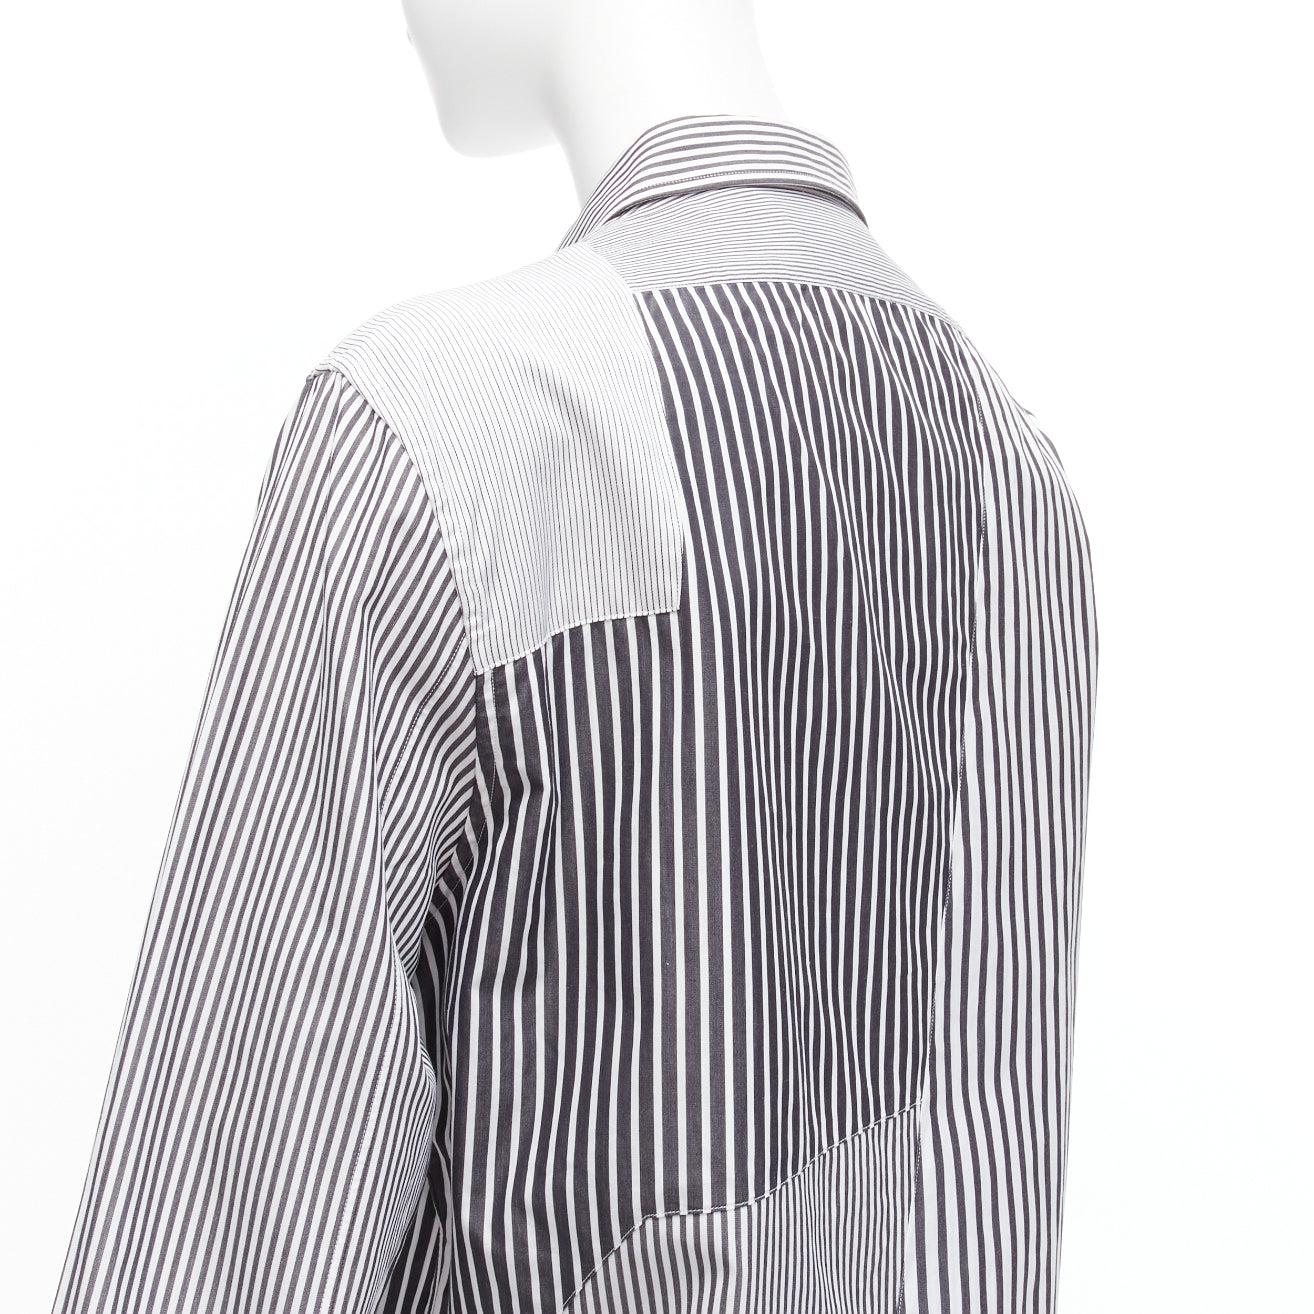 ALEXANDER MCQUEEN grey white cotton mixed stripes patchwork shirt Sz.16 L
Reference: CAWG/A00280
Brand: Alexander McQueen
Material: Cotton
Color: Grey, White
Pattern: Striped
Closure: Button
Extra Details: Holographic shell buttons. Stripe patchwork